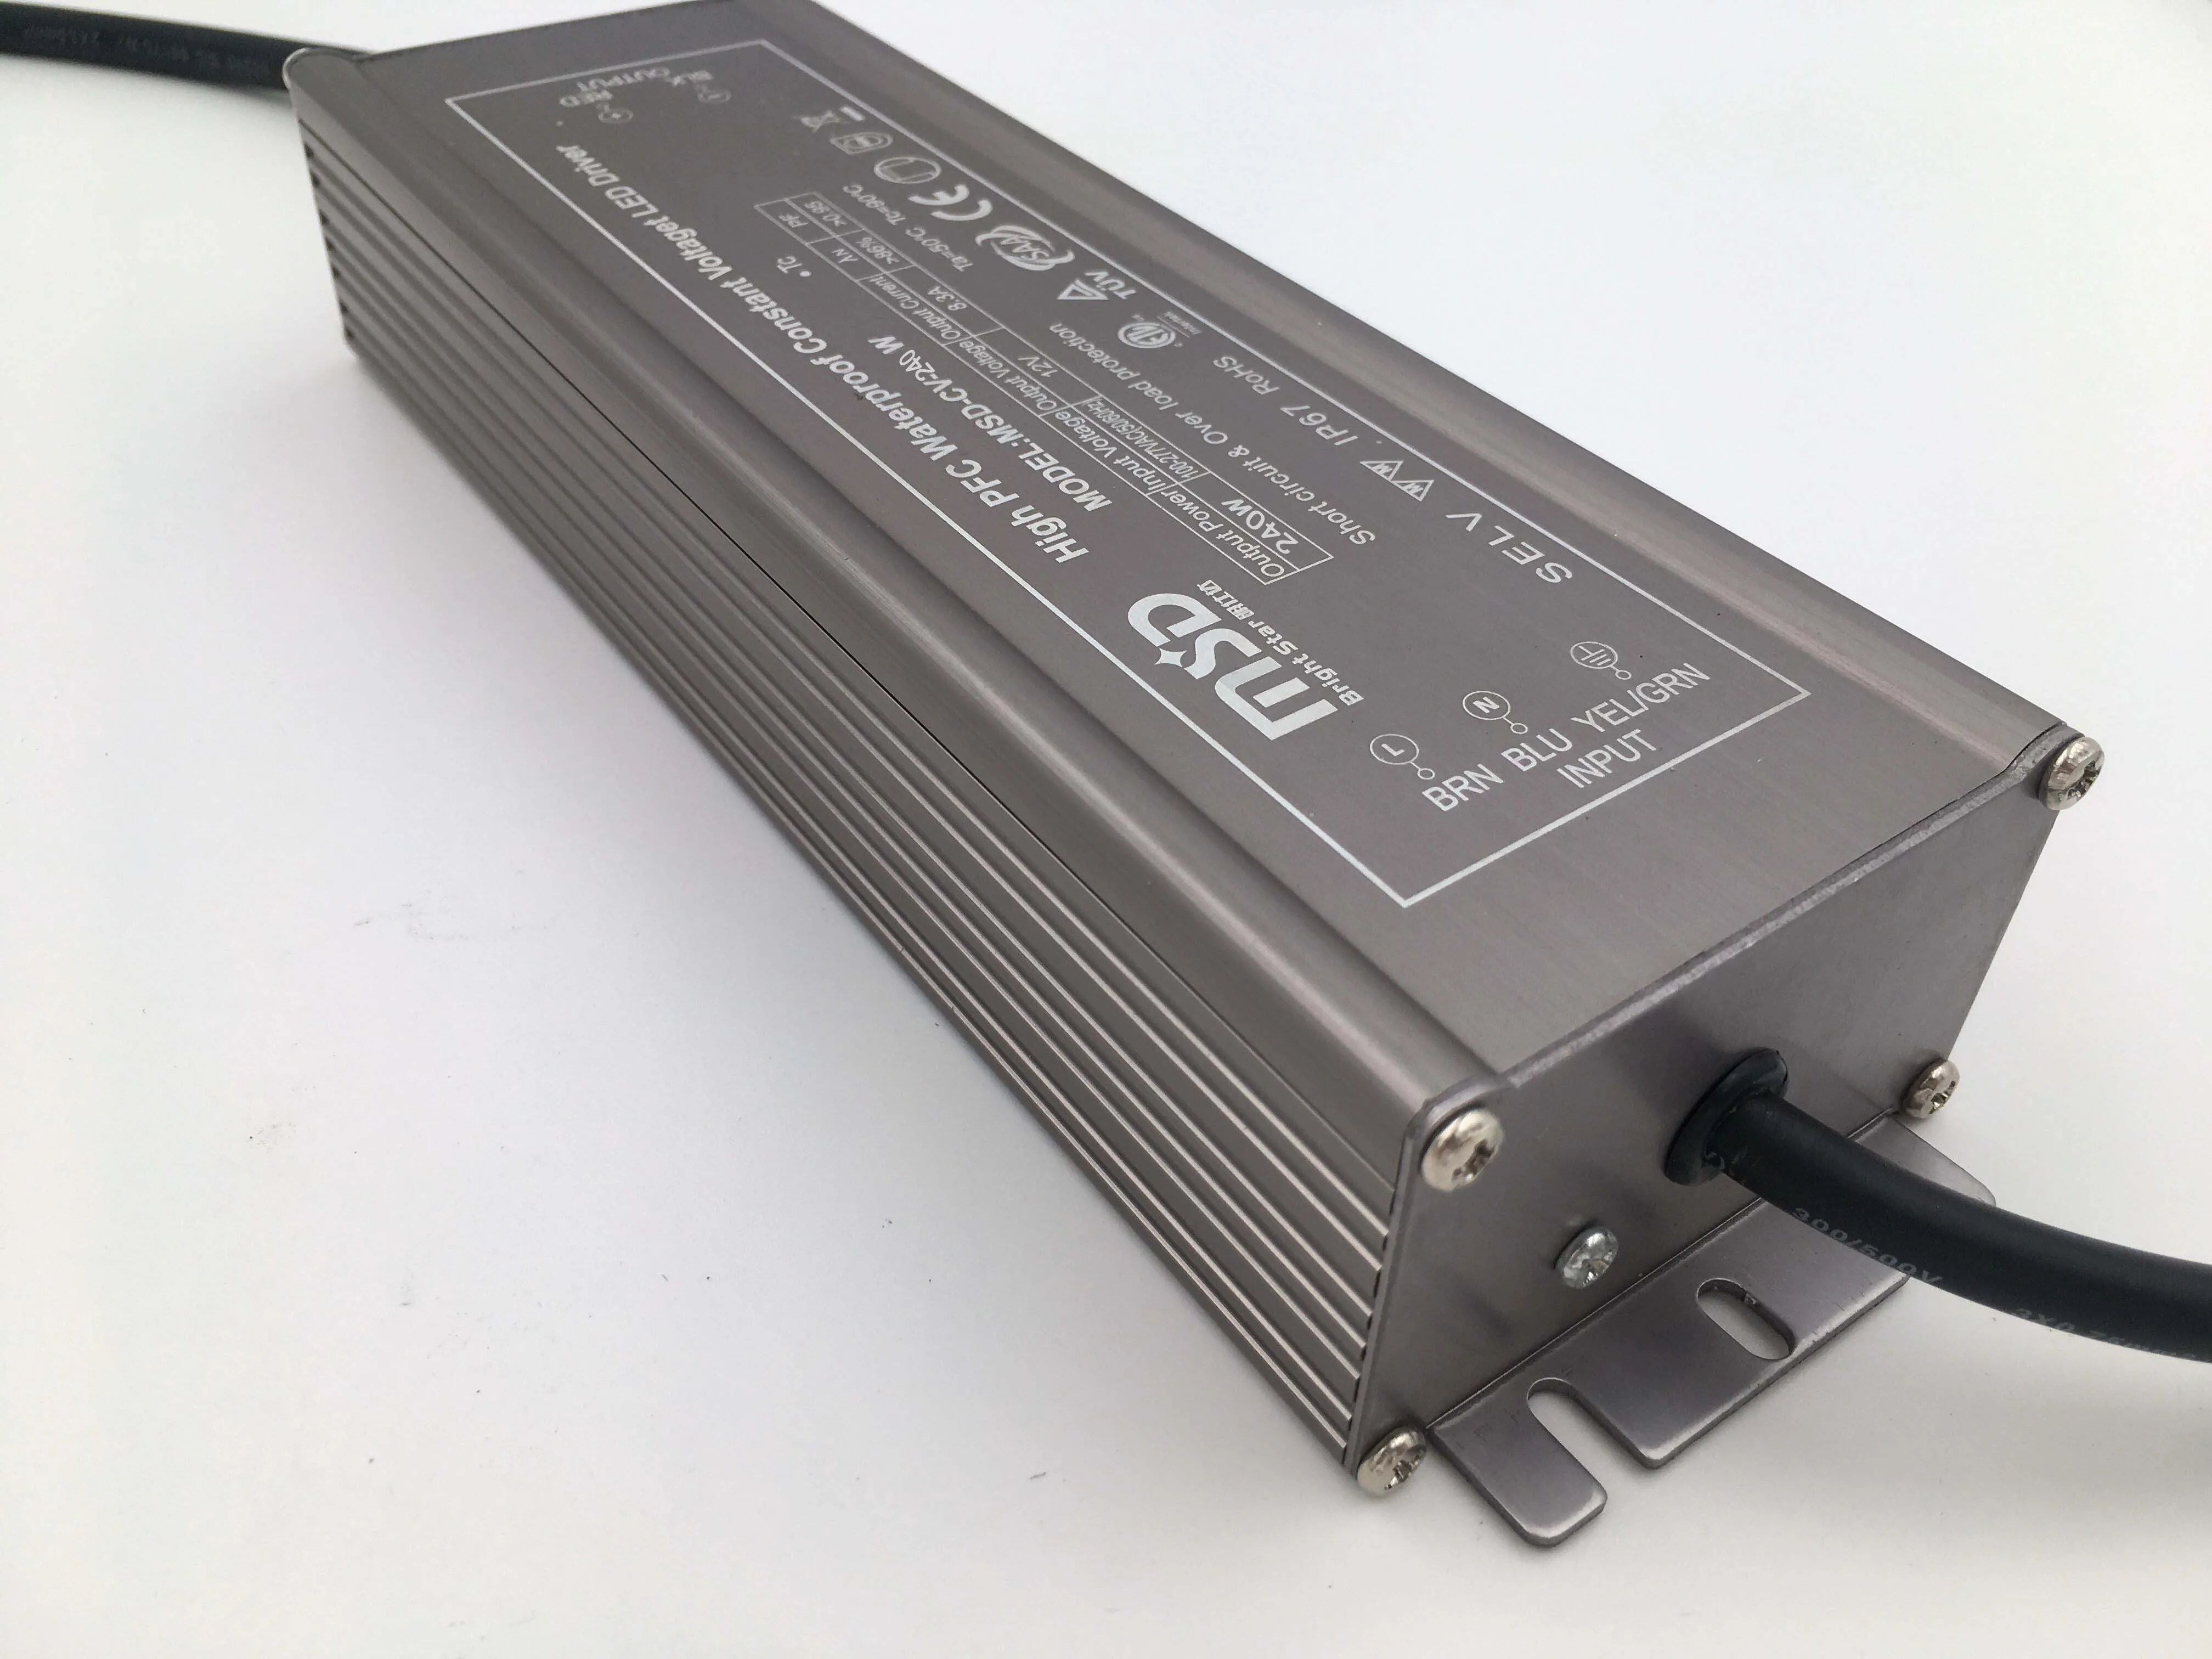 IP67 waterproof electric switching power supply led230v 12v 24v 110v ac to 36v dc led transformer 300w 25A 12.5A 8.3A led driver